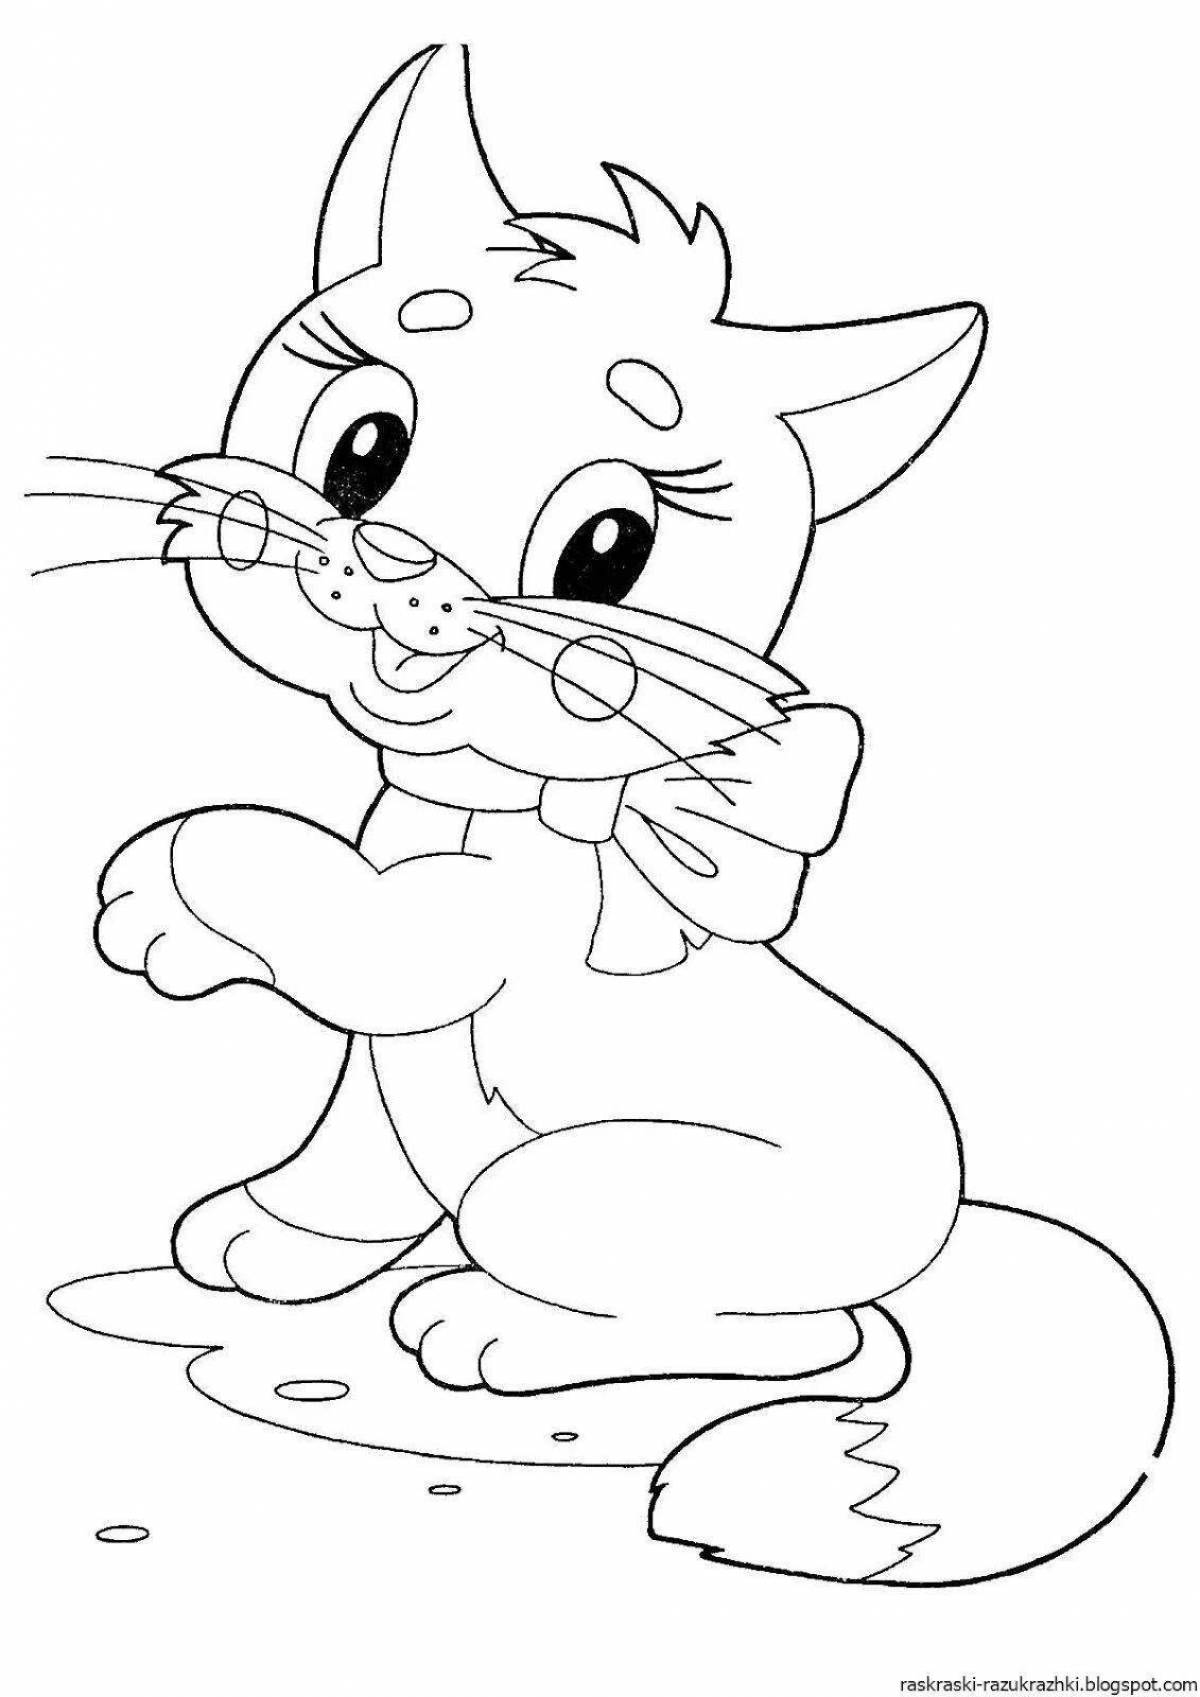 Adorable cat coloring book for kids